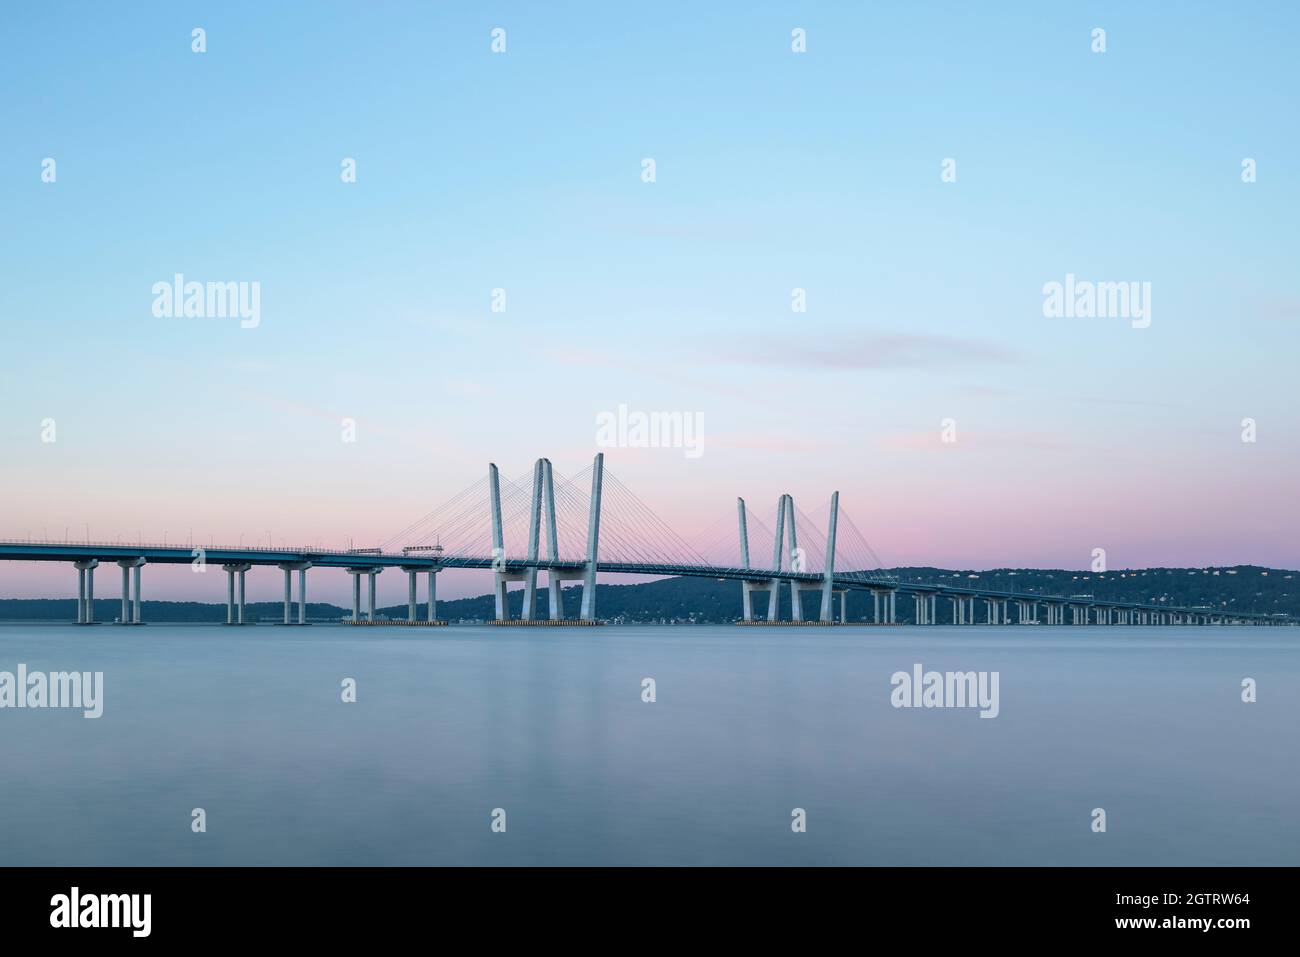 The Governor Mario M. Cuomo Bridge spanning the Hudson River at sunrise with sunlit pink/magenta clouds overhead. Stock Photo